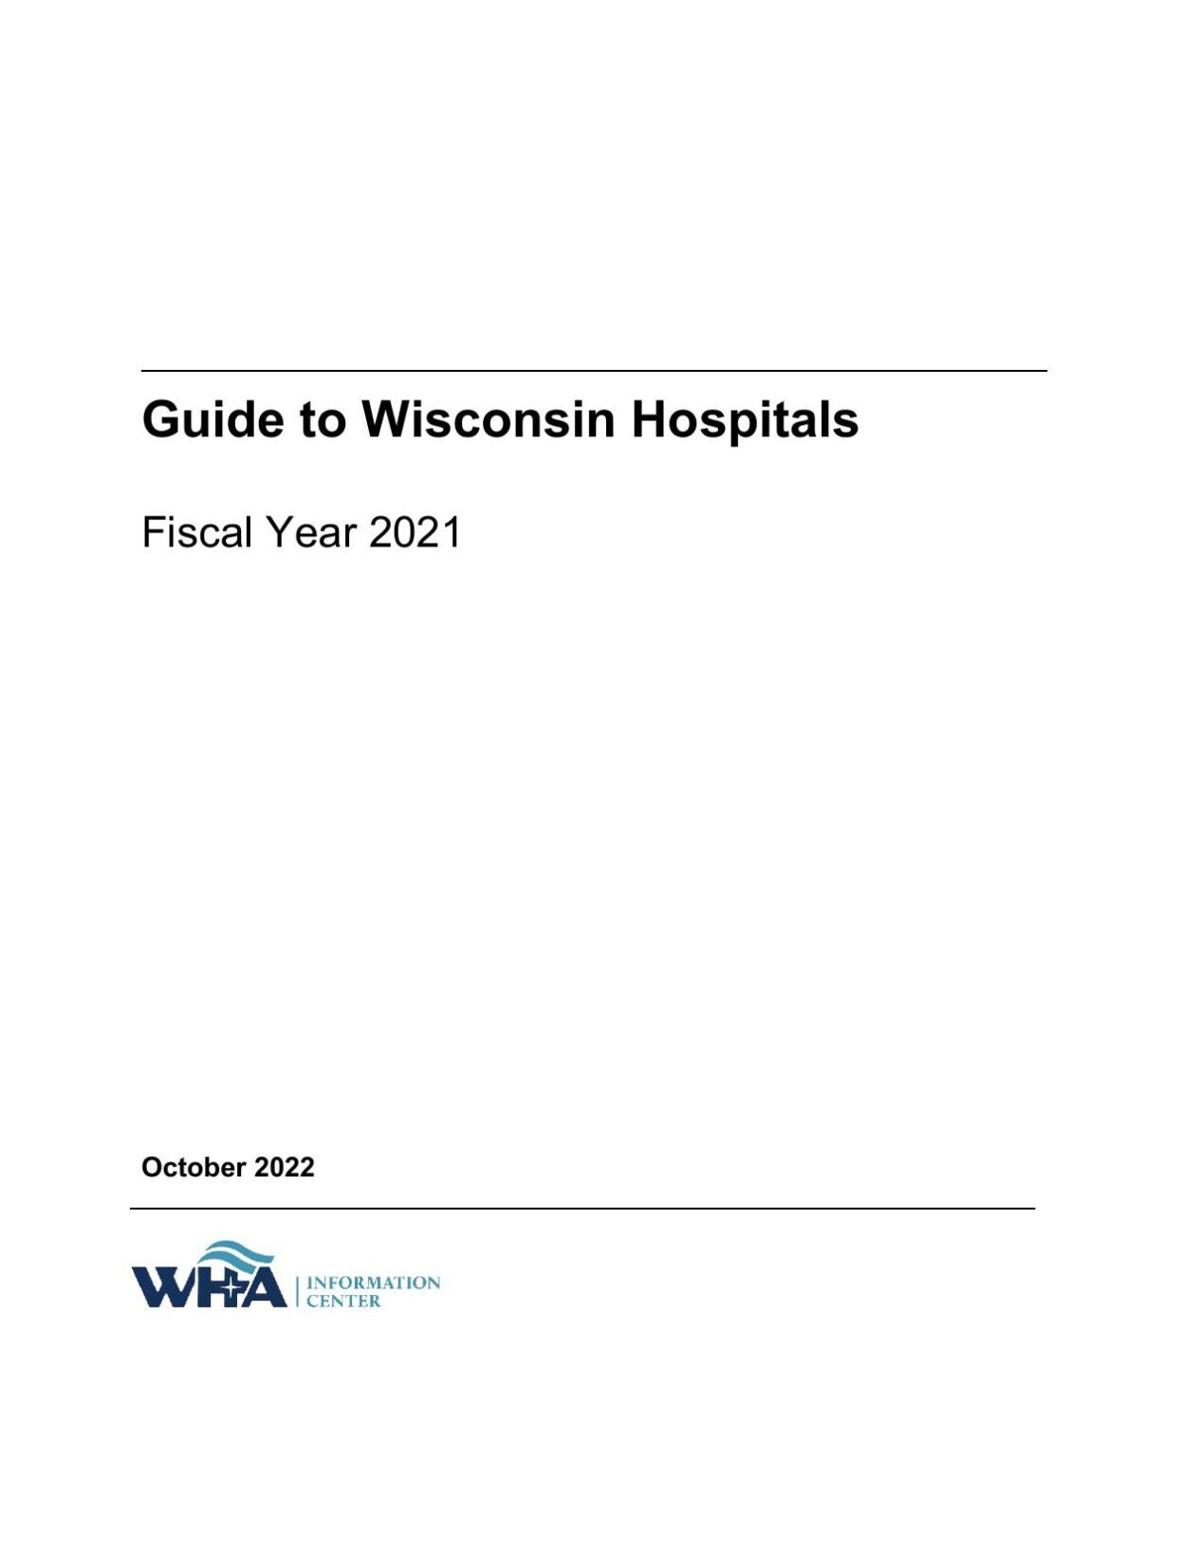 WHA Guide to Wisconsin Hospitals